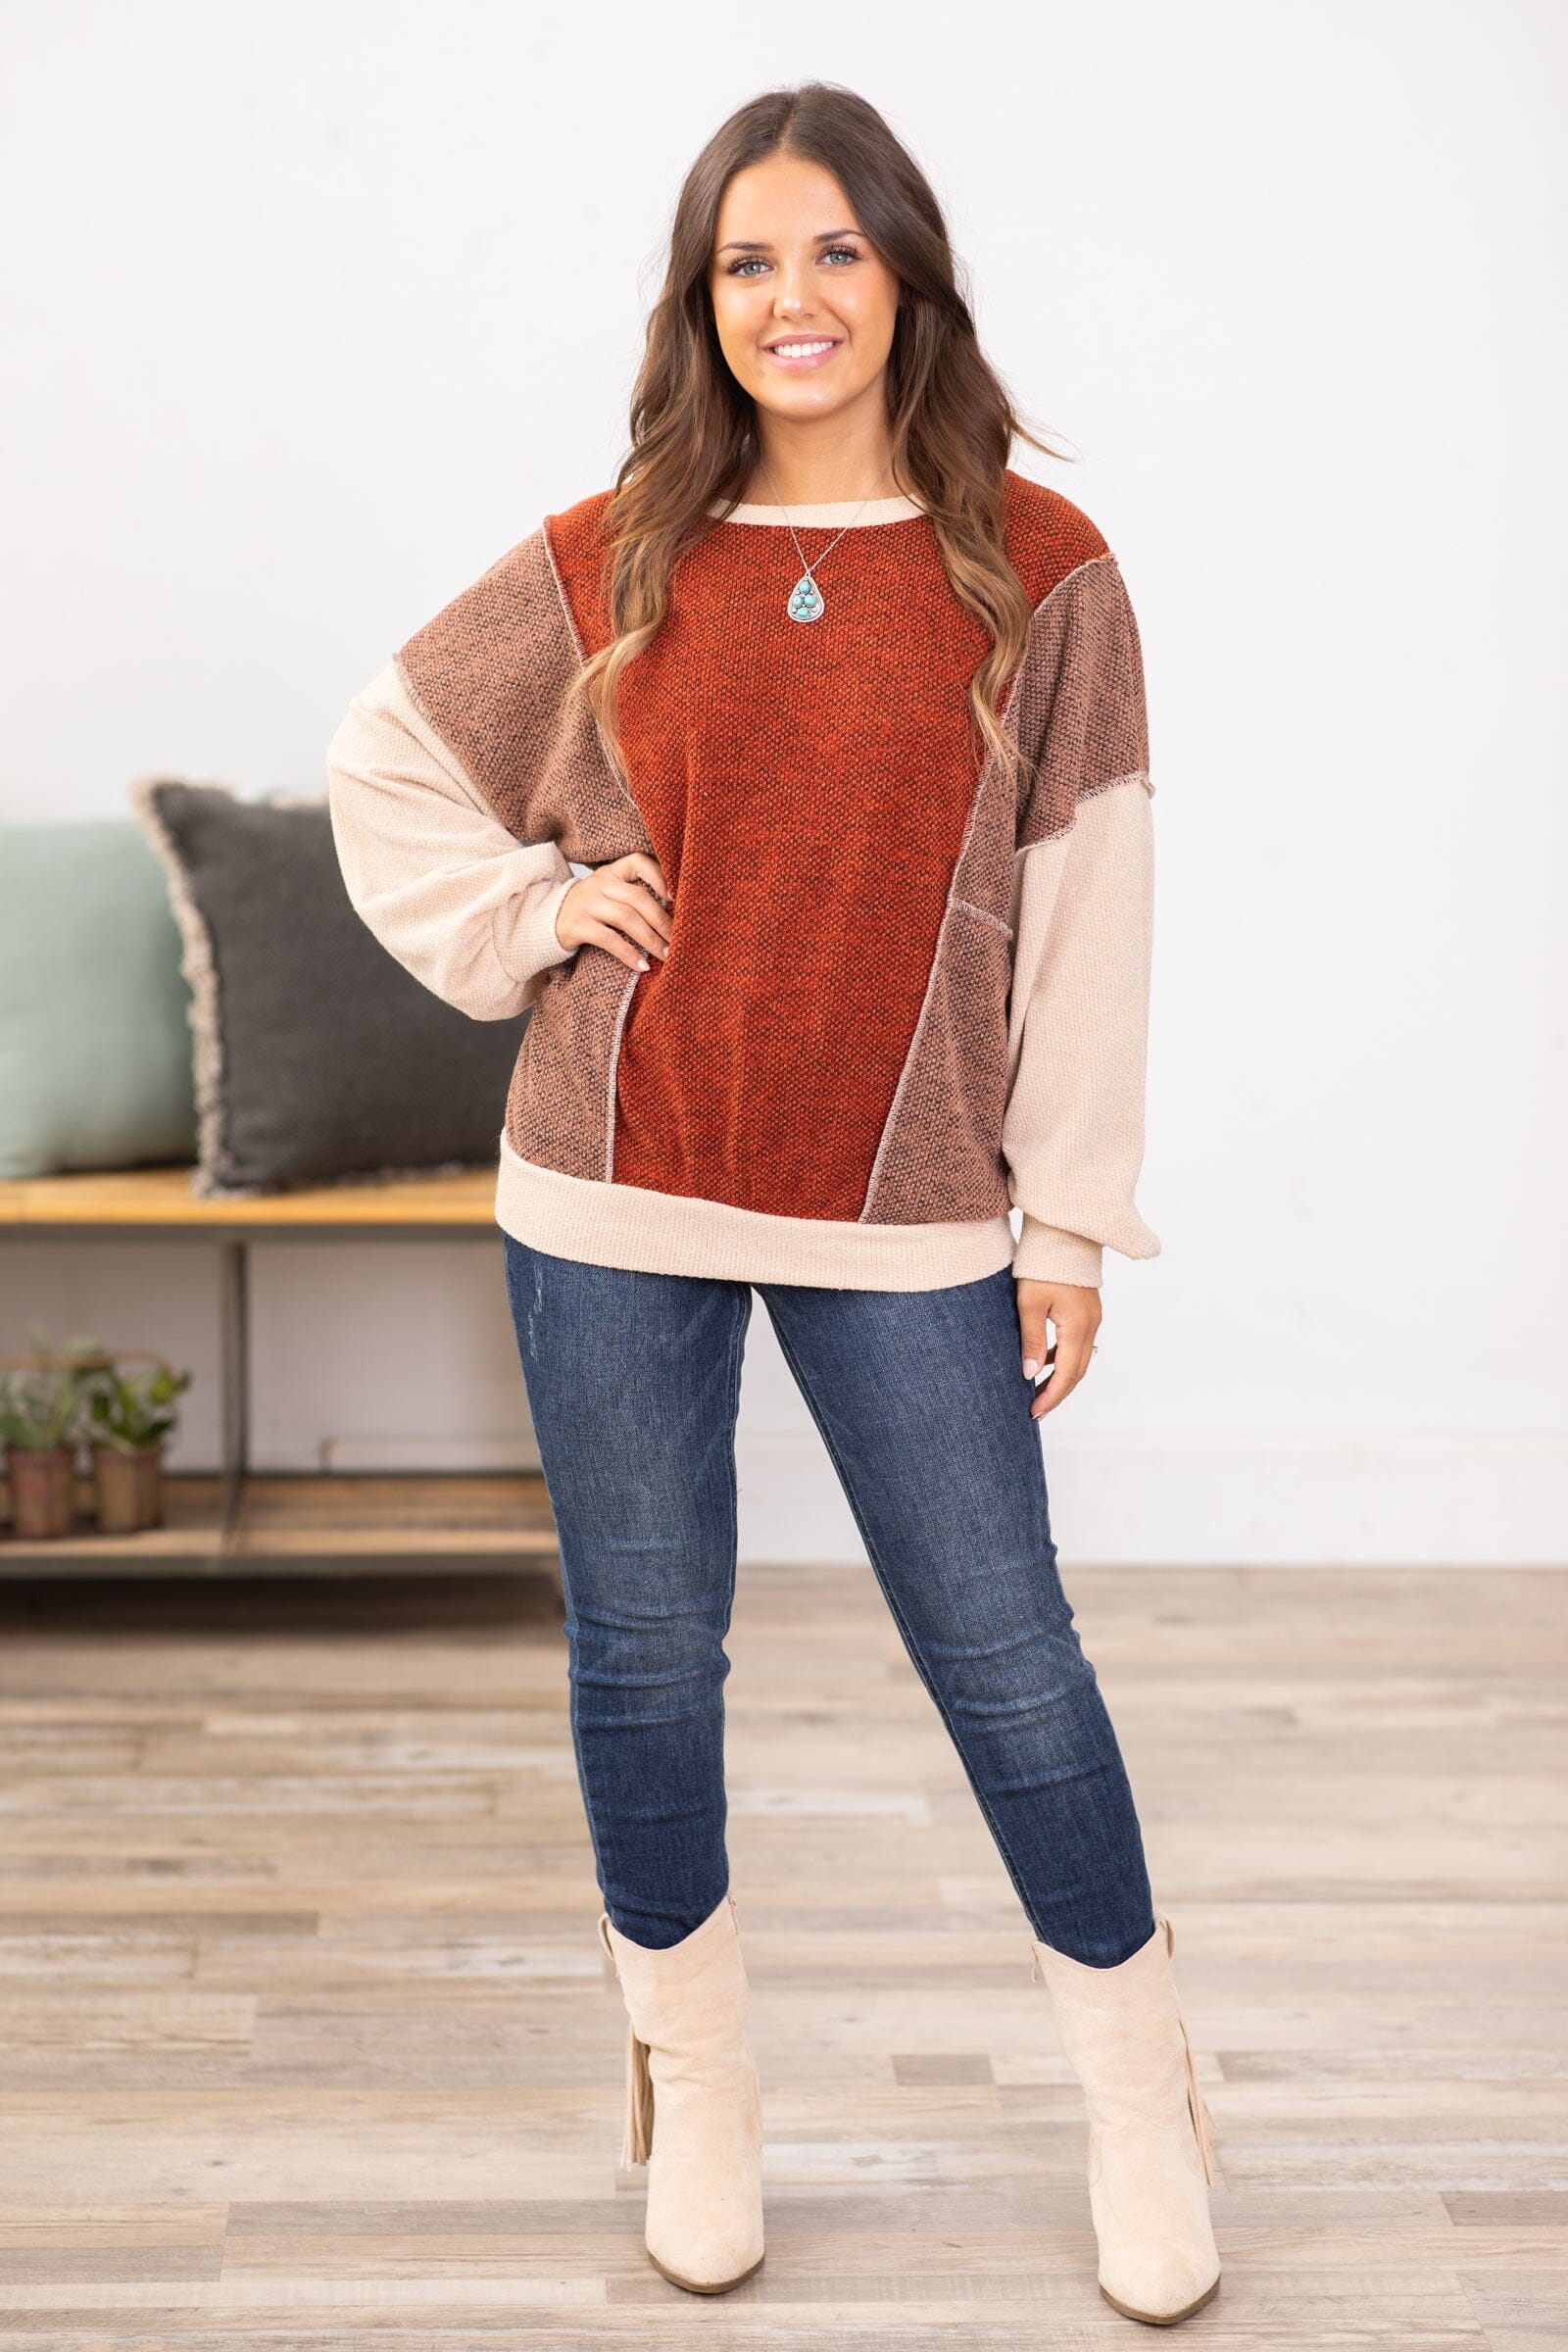 Rust and Mocha Colorblock Textured Top - Filly Flair